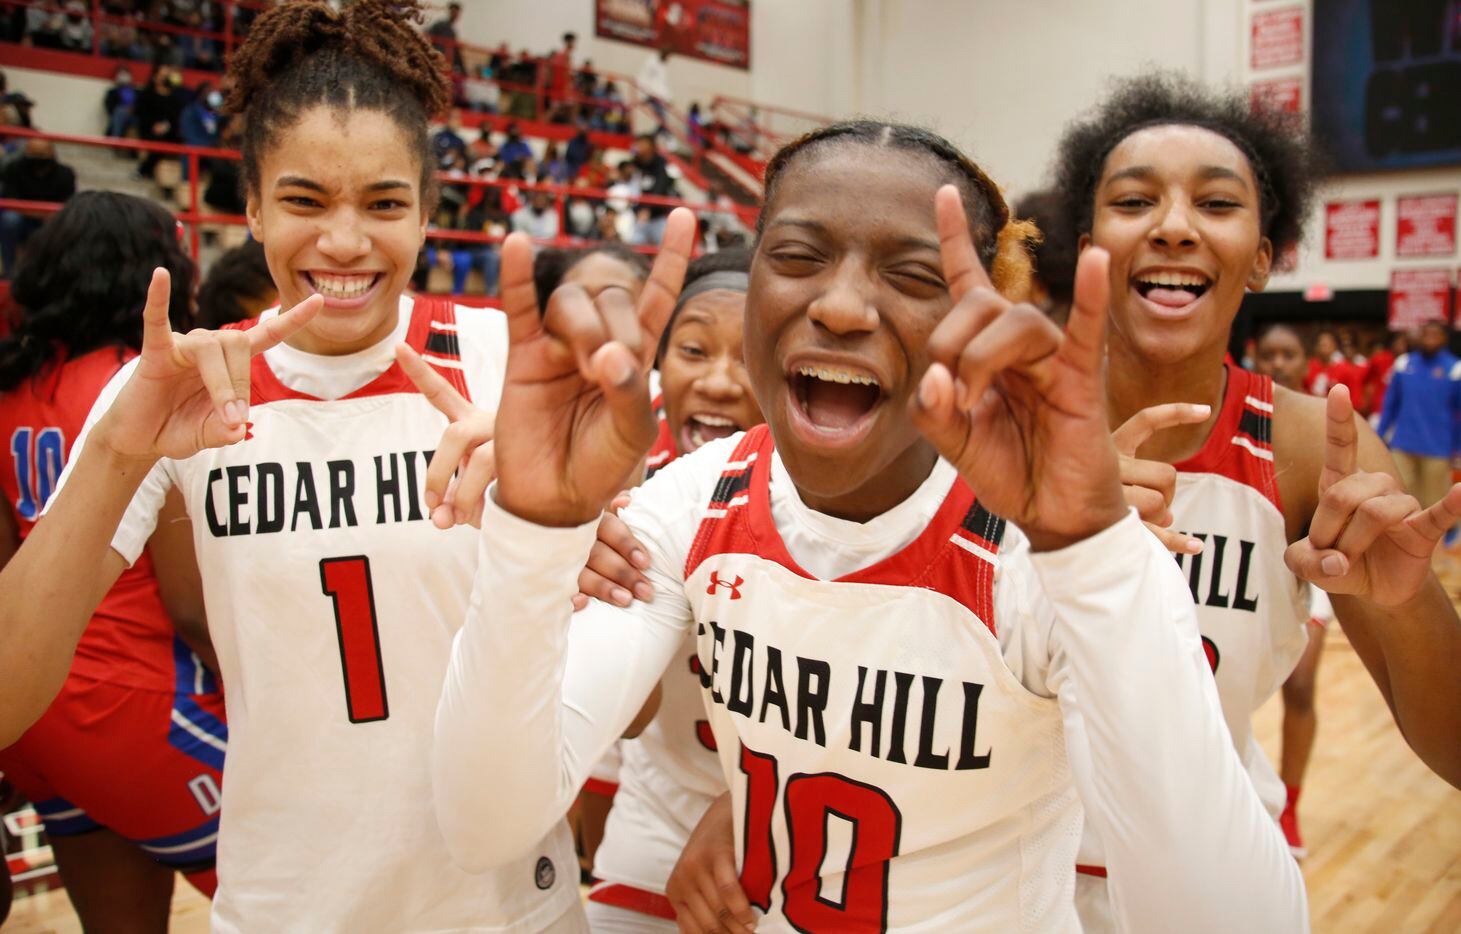 Cedar Hill players celebrate after their 80-72 victory over Duncanville. The two teams played their District 11-6A girls basketball game at Cedar Hill High School in Cedar Hill on January 14, 2022. (Steve Hamm/ Special Contributor)